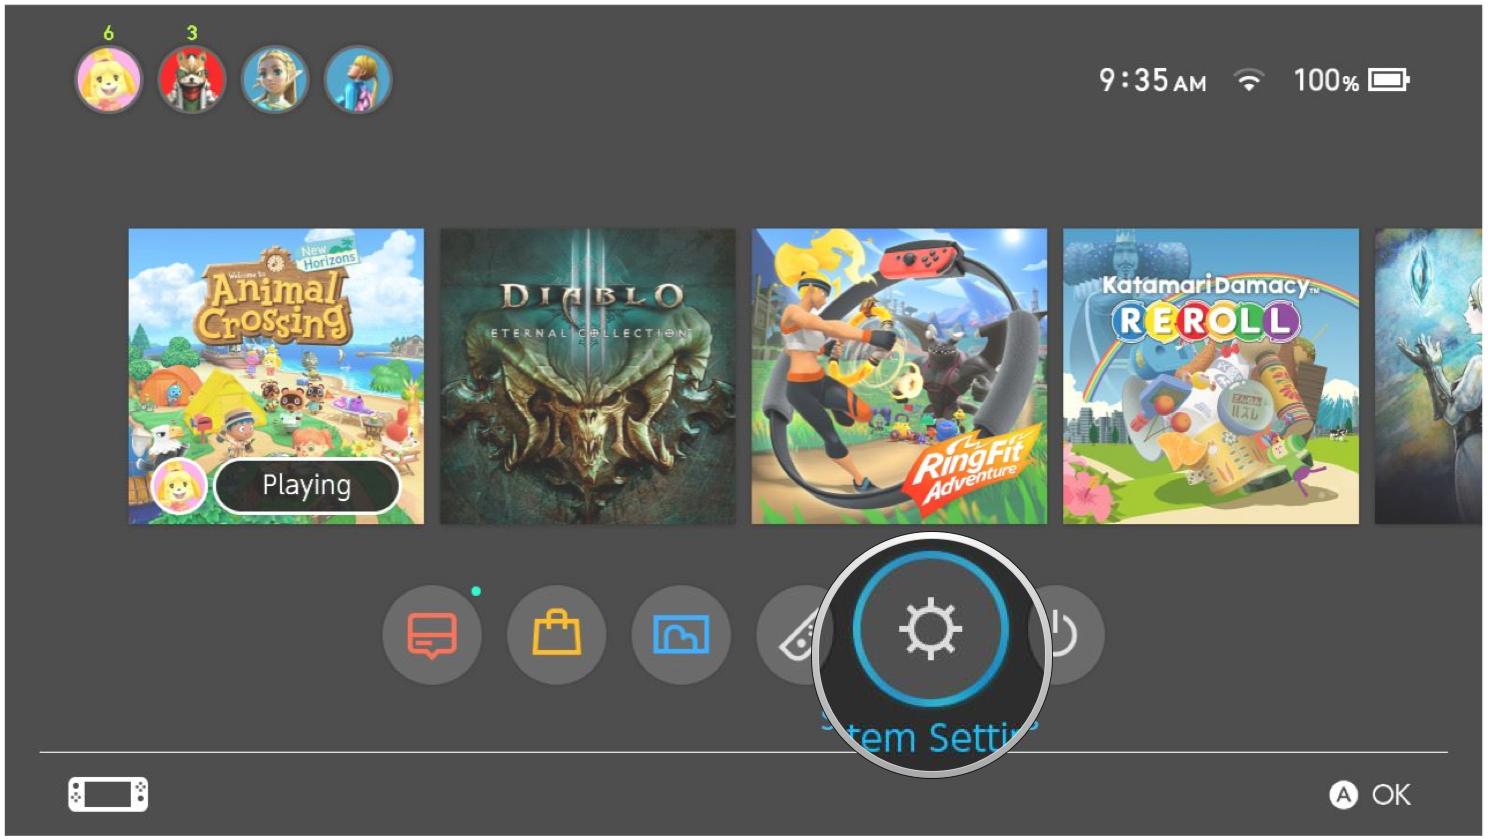 How to connect to a hotspot on your Nintendo Switch by showing steps: On the Switch Home Screen, select System Settings